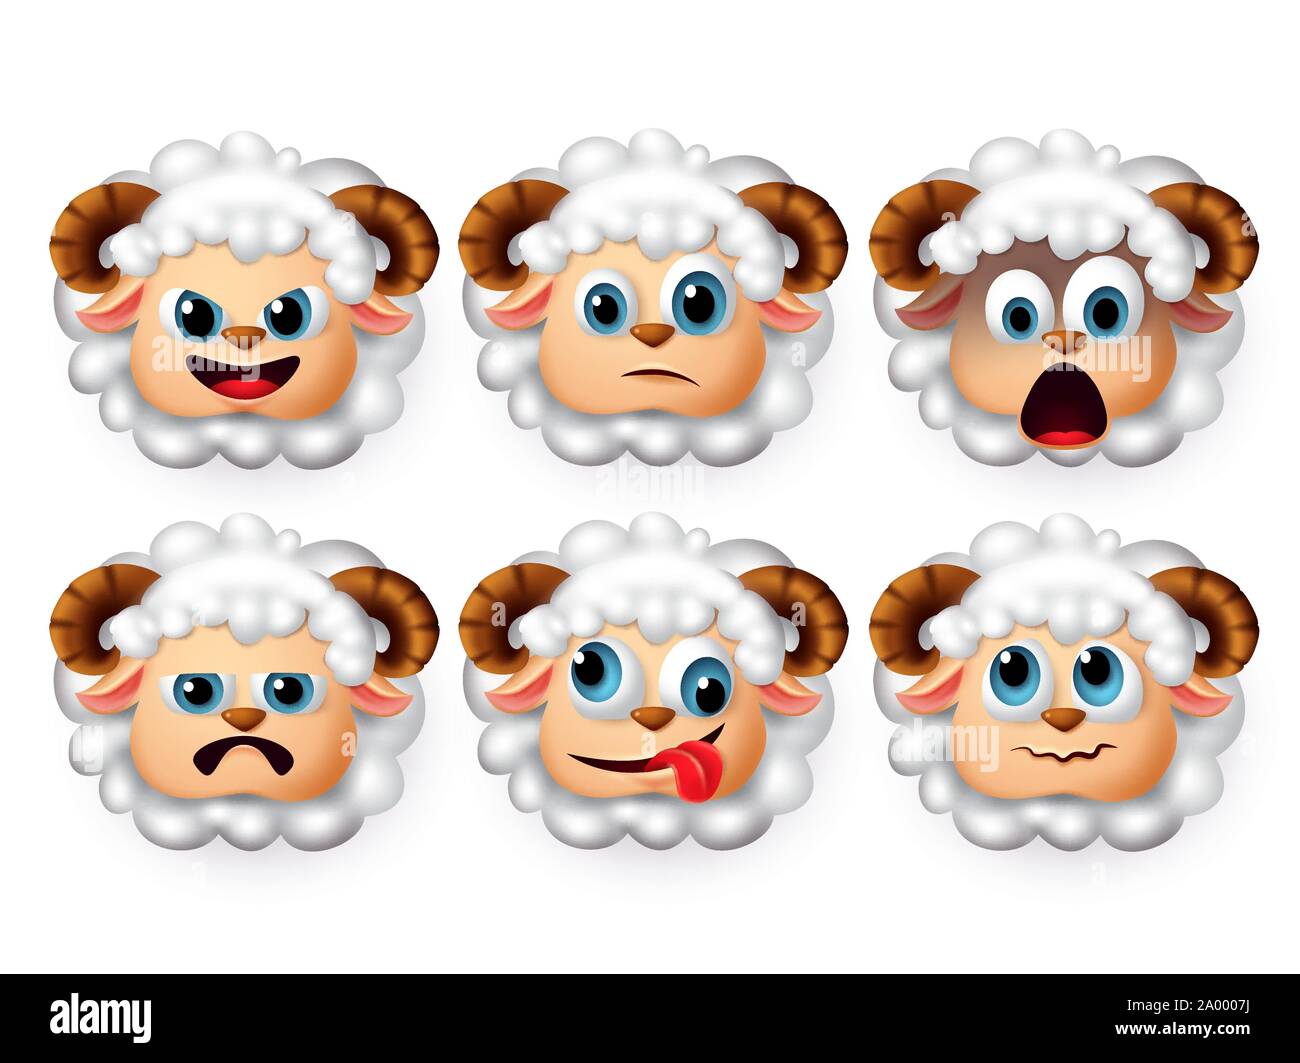 Lamb face emoticon vector set. Emoji and emoticon of cute lamb sheep in curly hair with sad and surprise expressions isolated in white background. Stock Vector